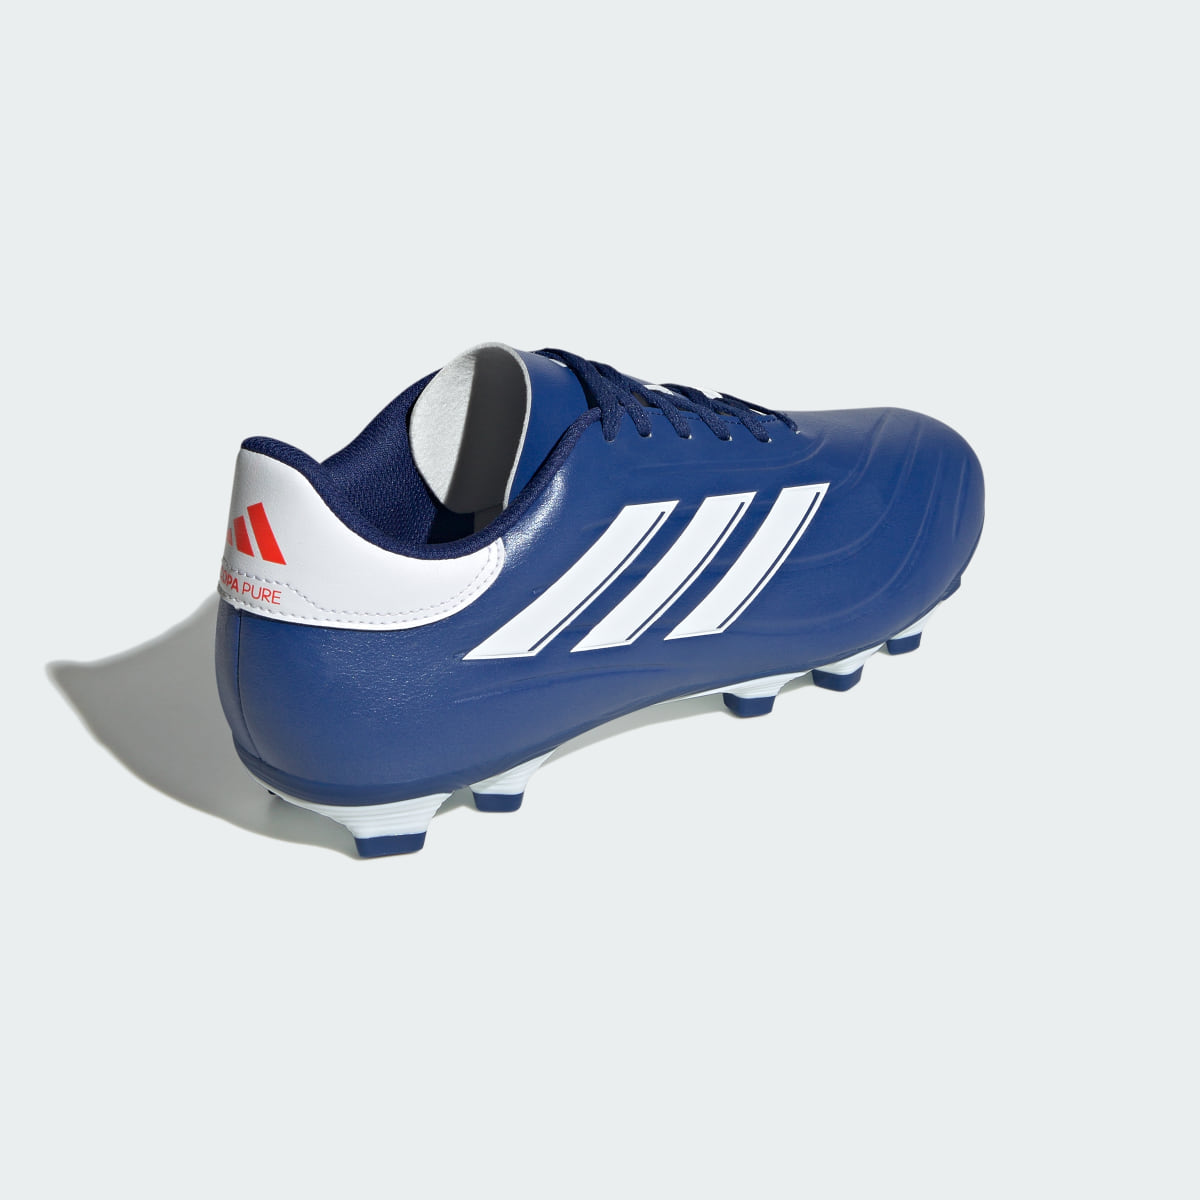 Adidas Copa Pure II.4 Flexible Ground Boots. 6